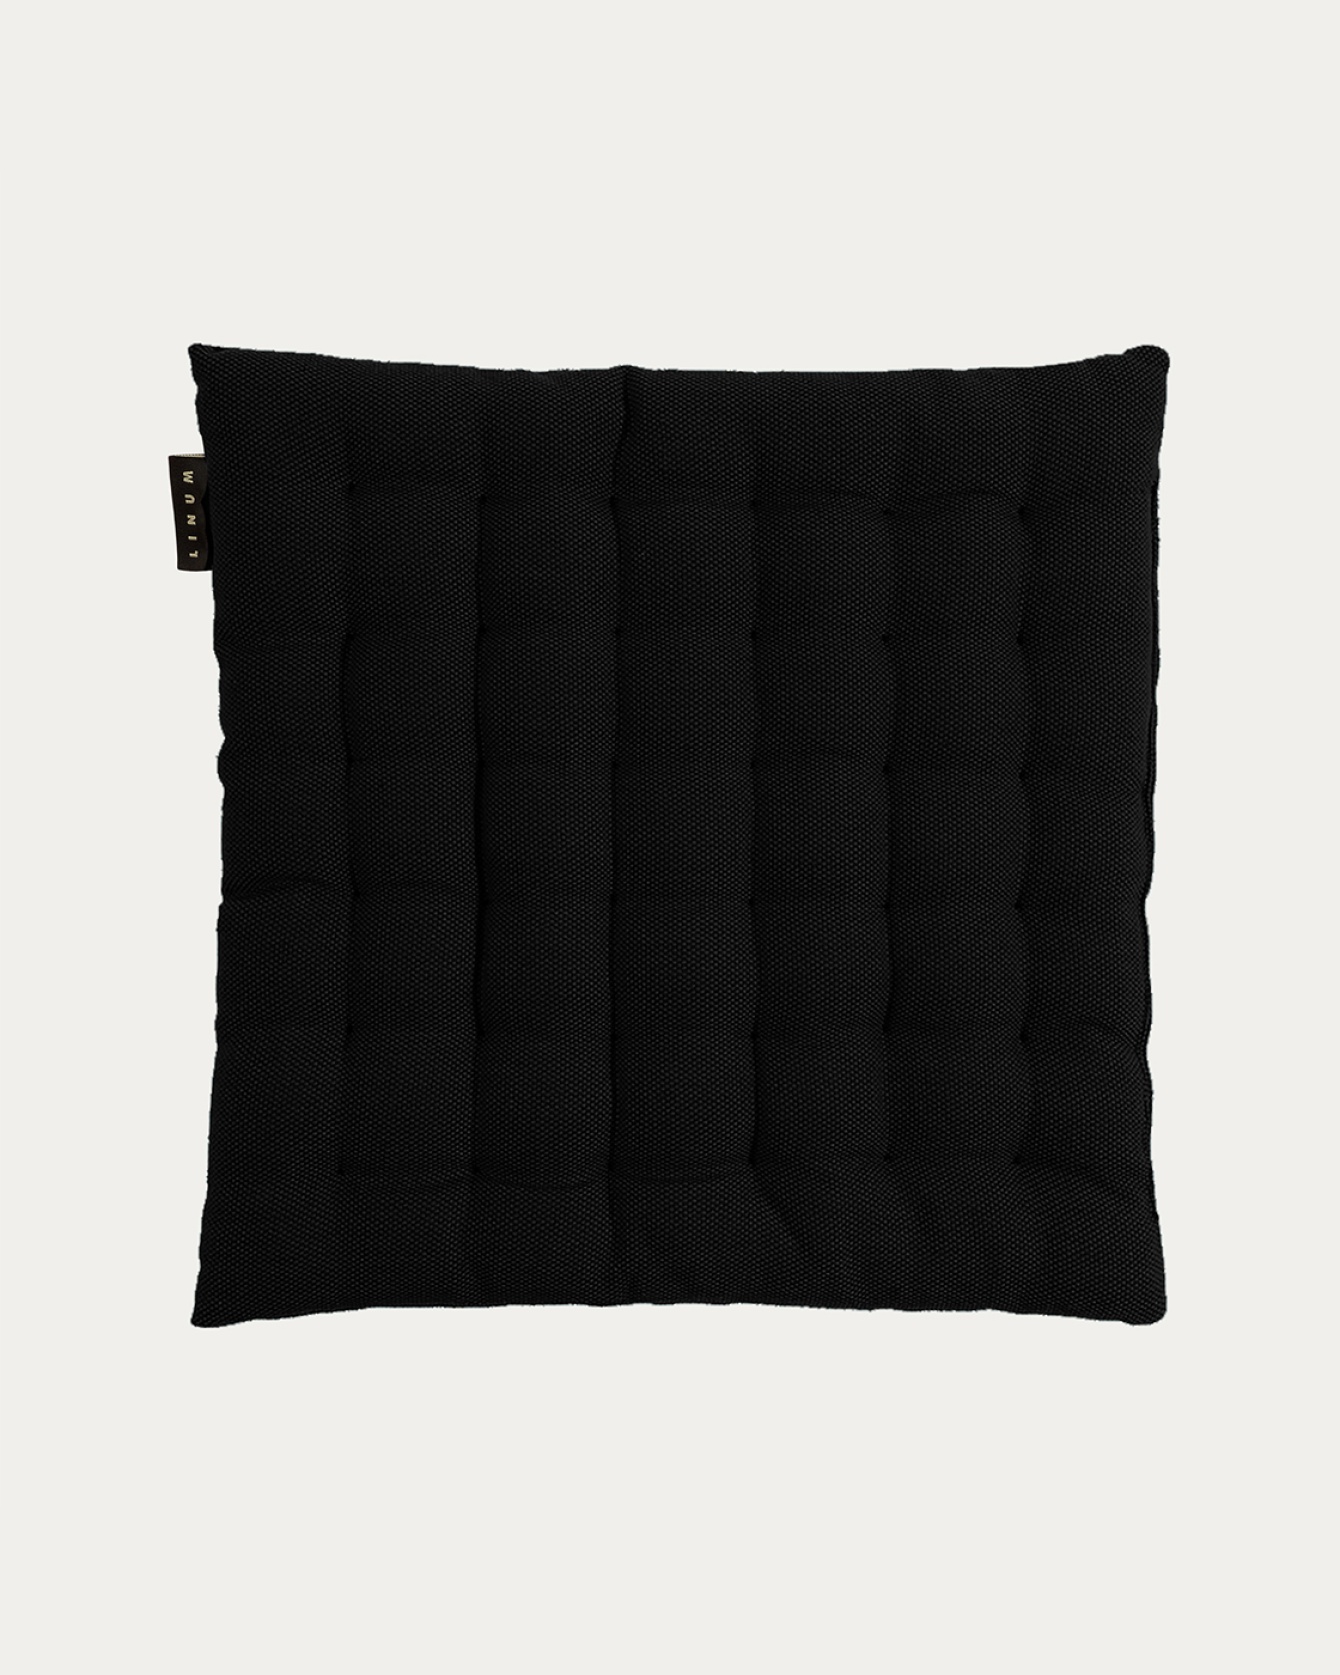 Product image black PEPPER seat cushion made of soft cotton with recycled polyester filling from LINUM DESIGN. Size 40x40 cm.